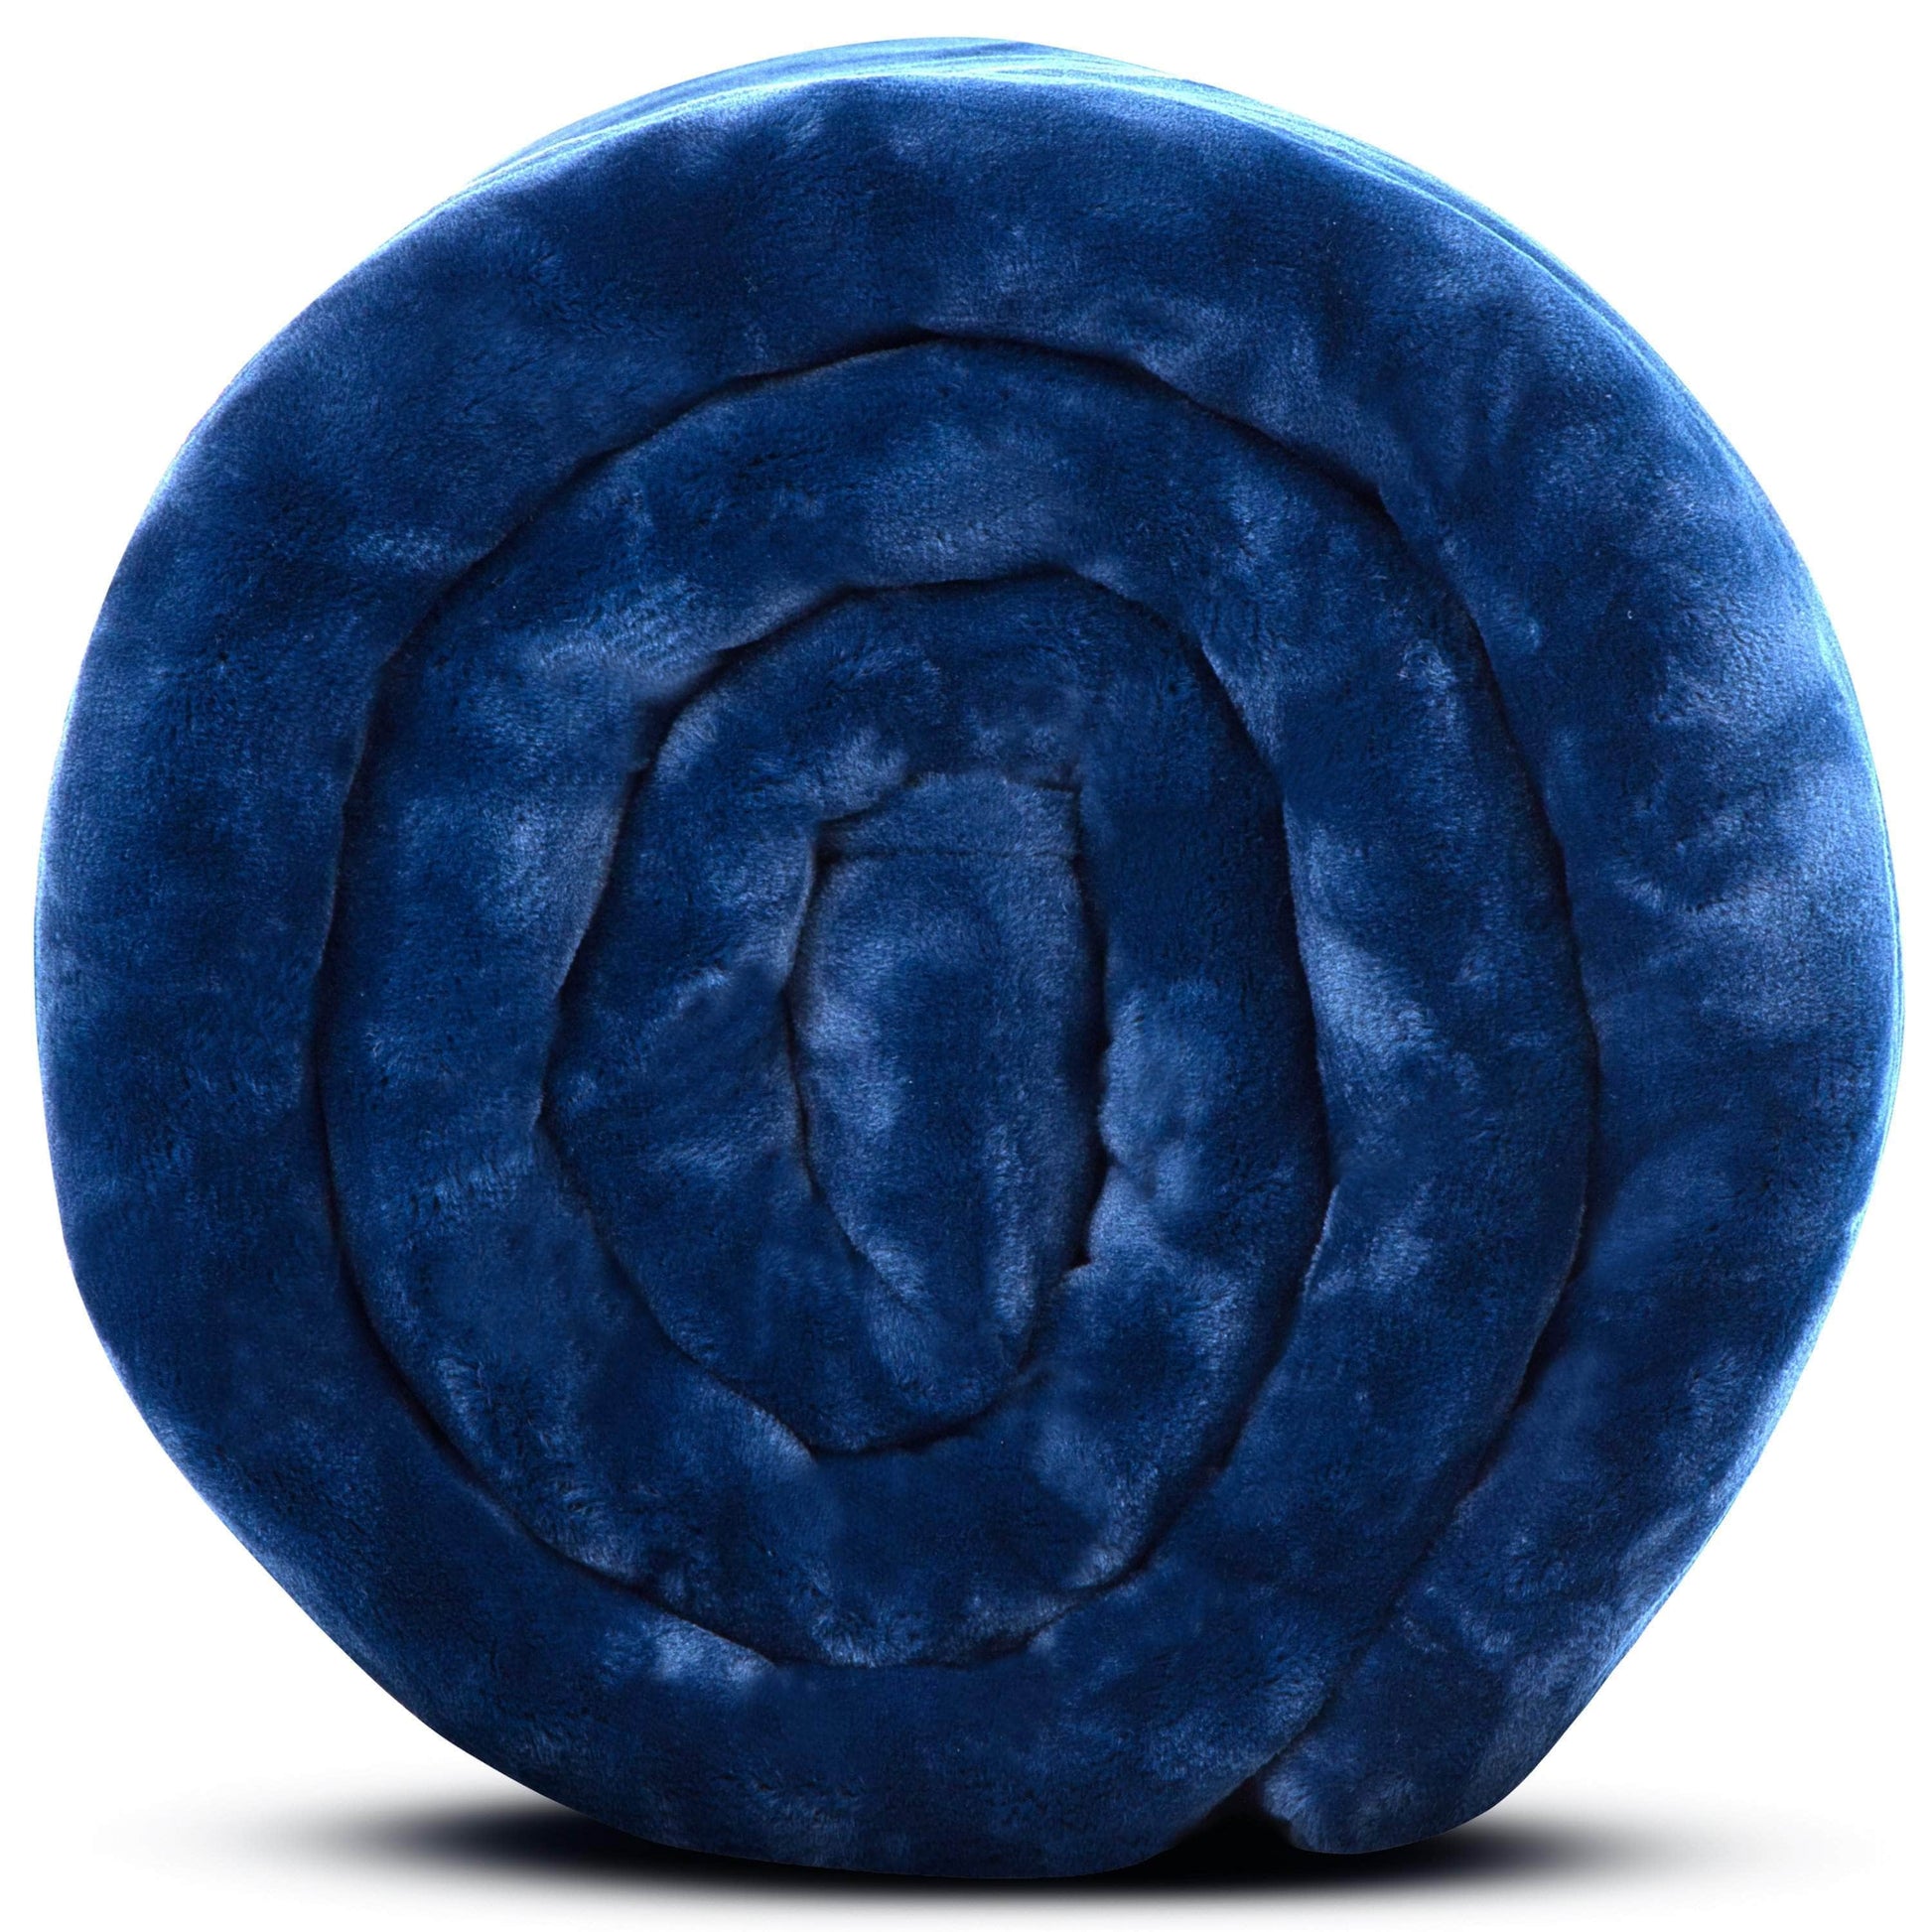 Hush Blankets Blanket Blue/White Hush 8lb Weighted Throw Sherpa Fleece Blanket - Available in 2 Colours